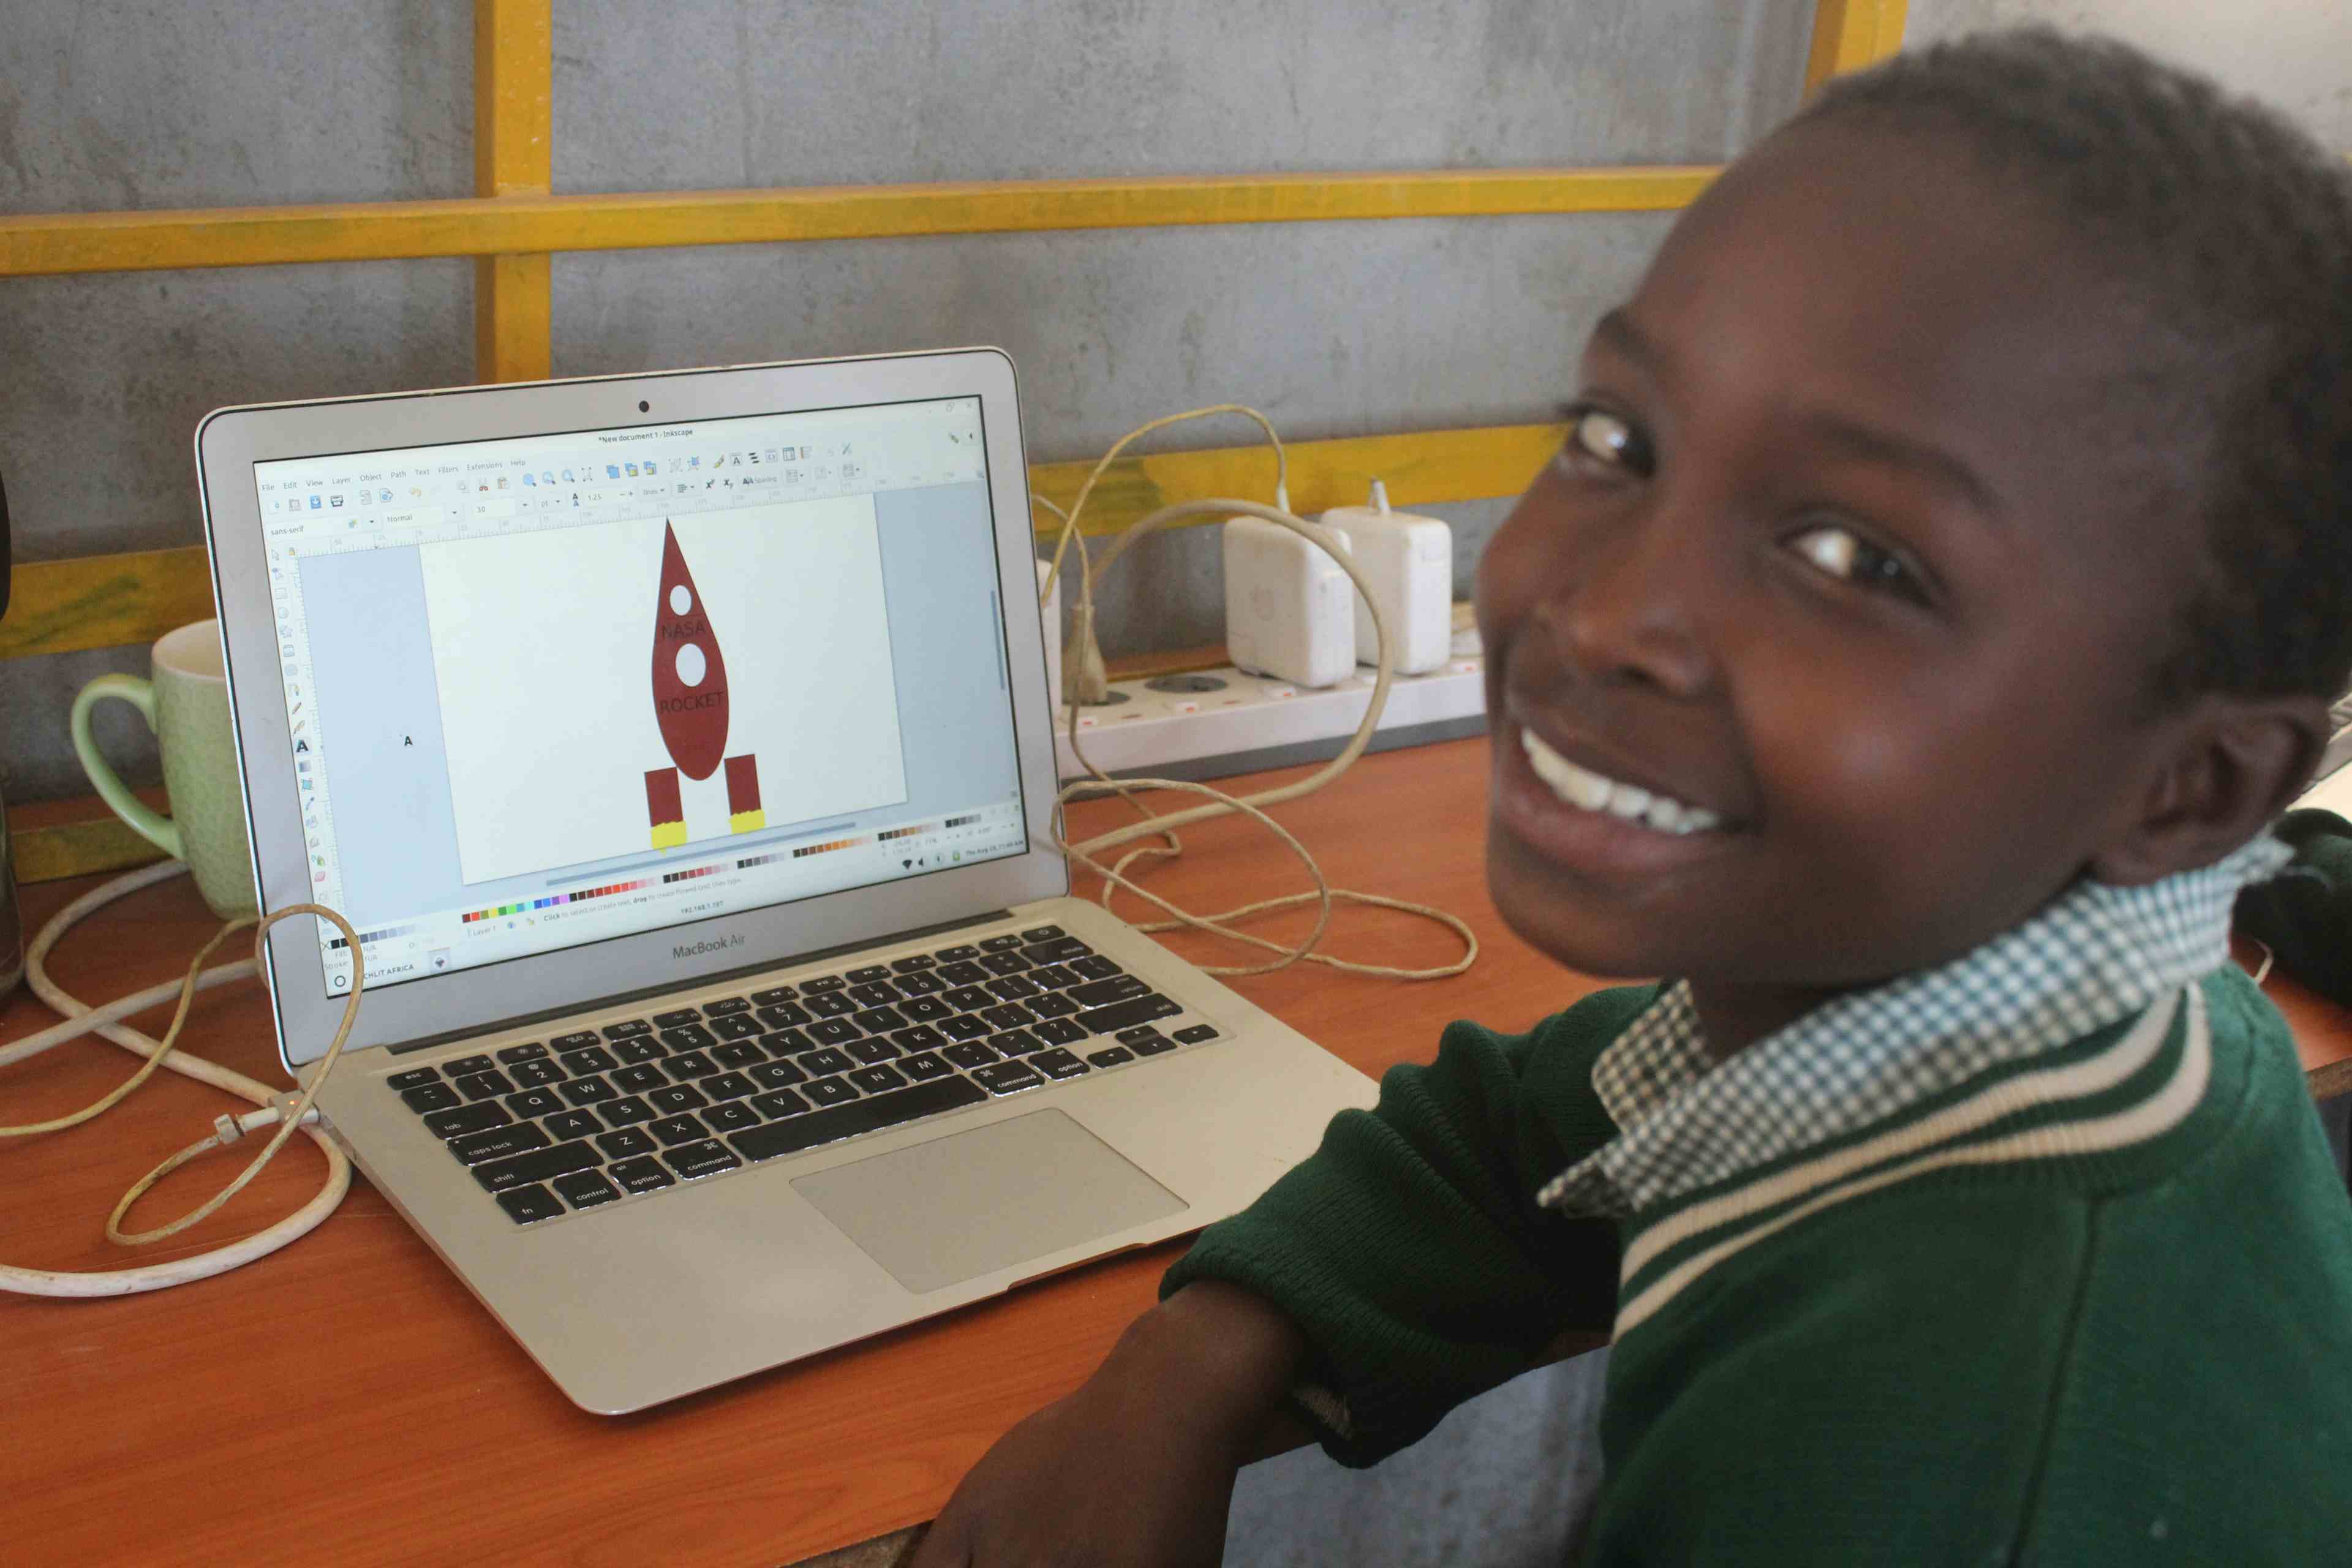 Rono showing his rocket on the screen at TechLit computer lab